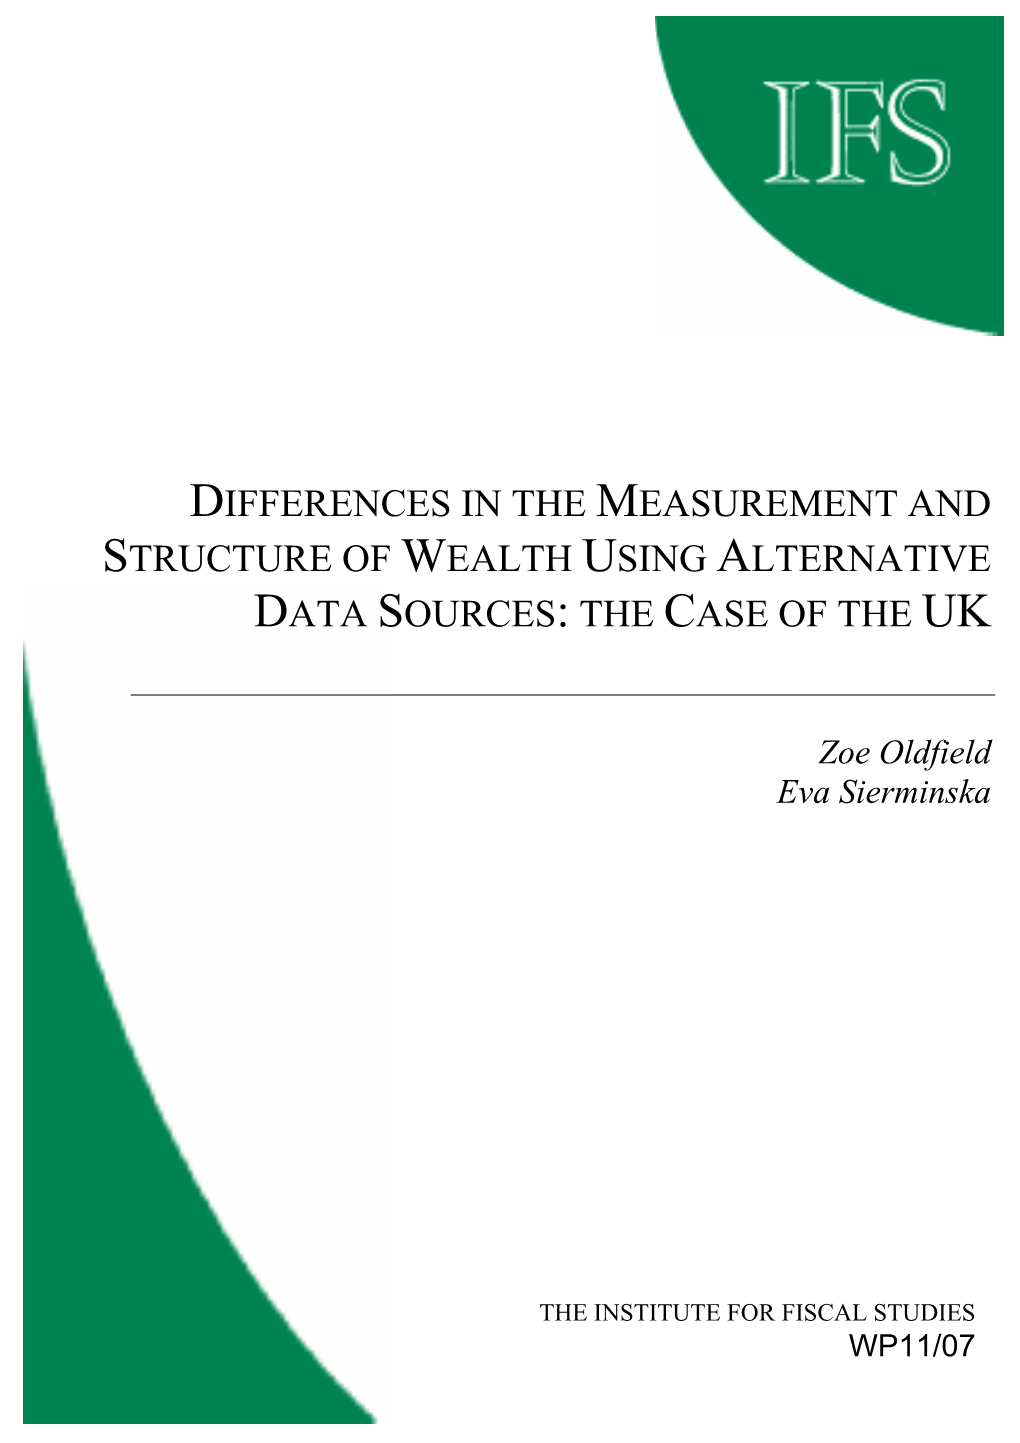 Differences in the Measurement and Structure of Wealth Using Alternative Data Sources: the Case of UK